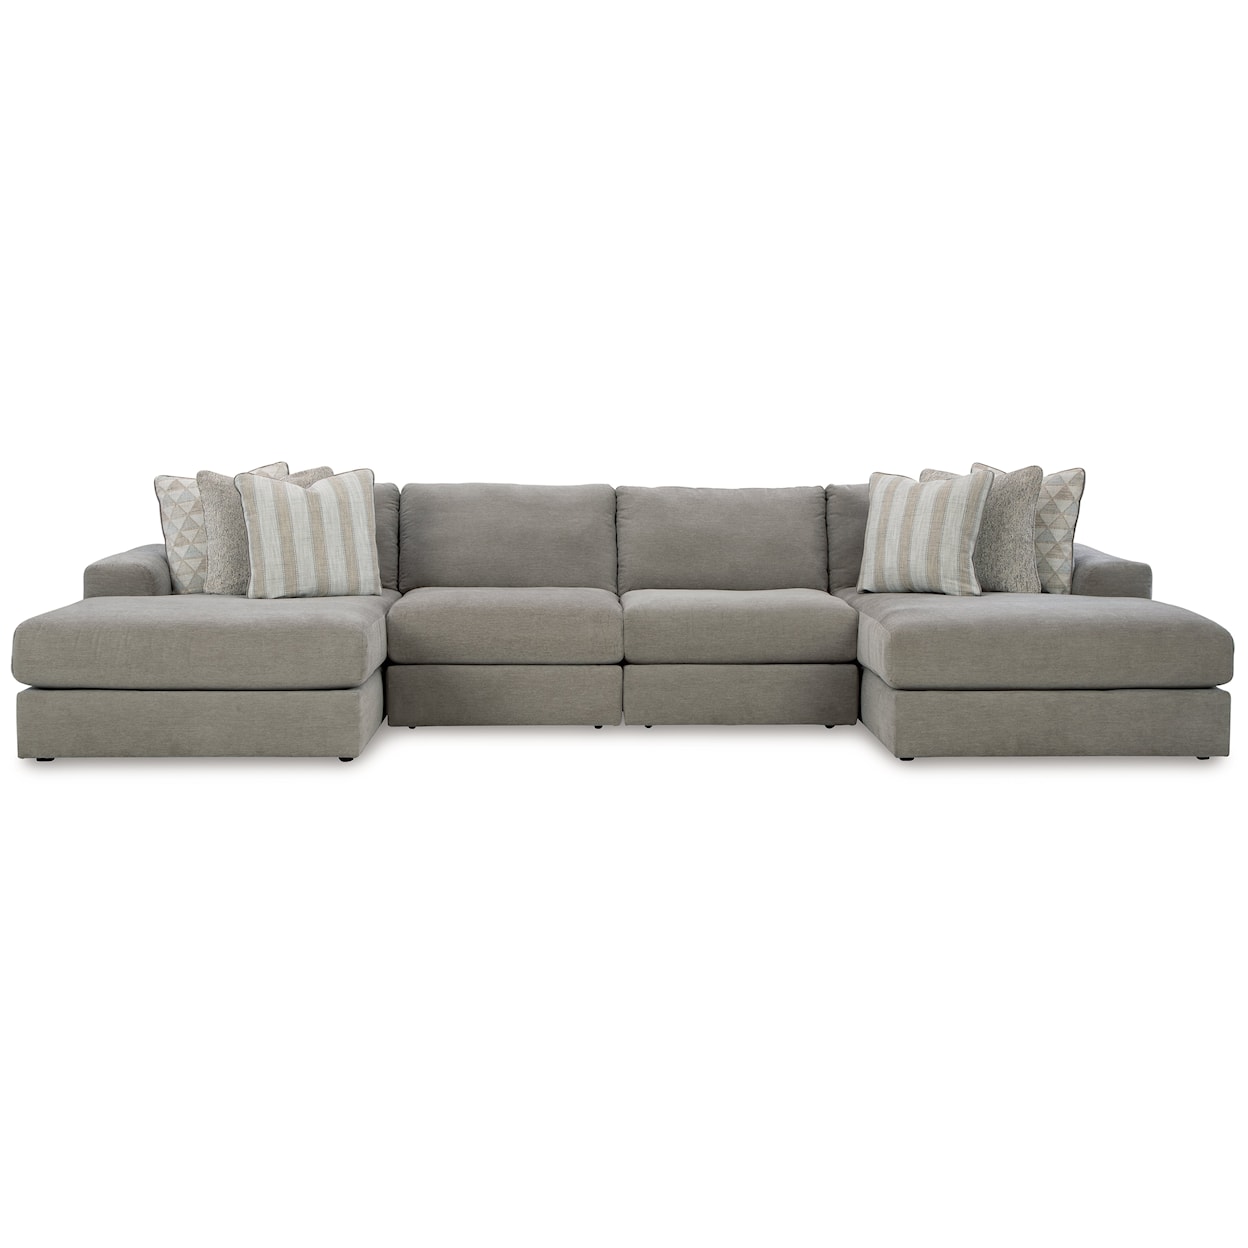 Signature Avaliyah 4-Piece Double Chaise Sectional